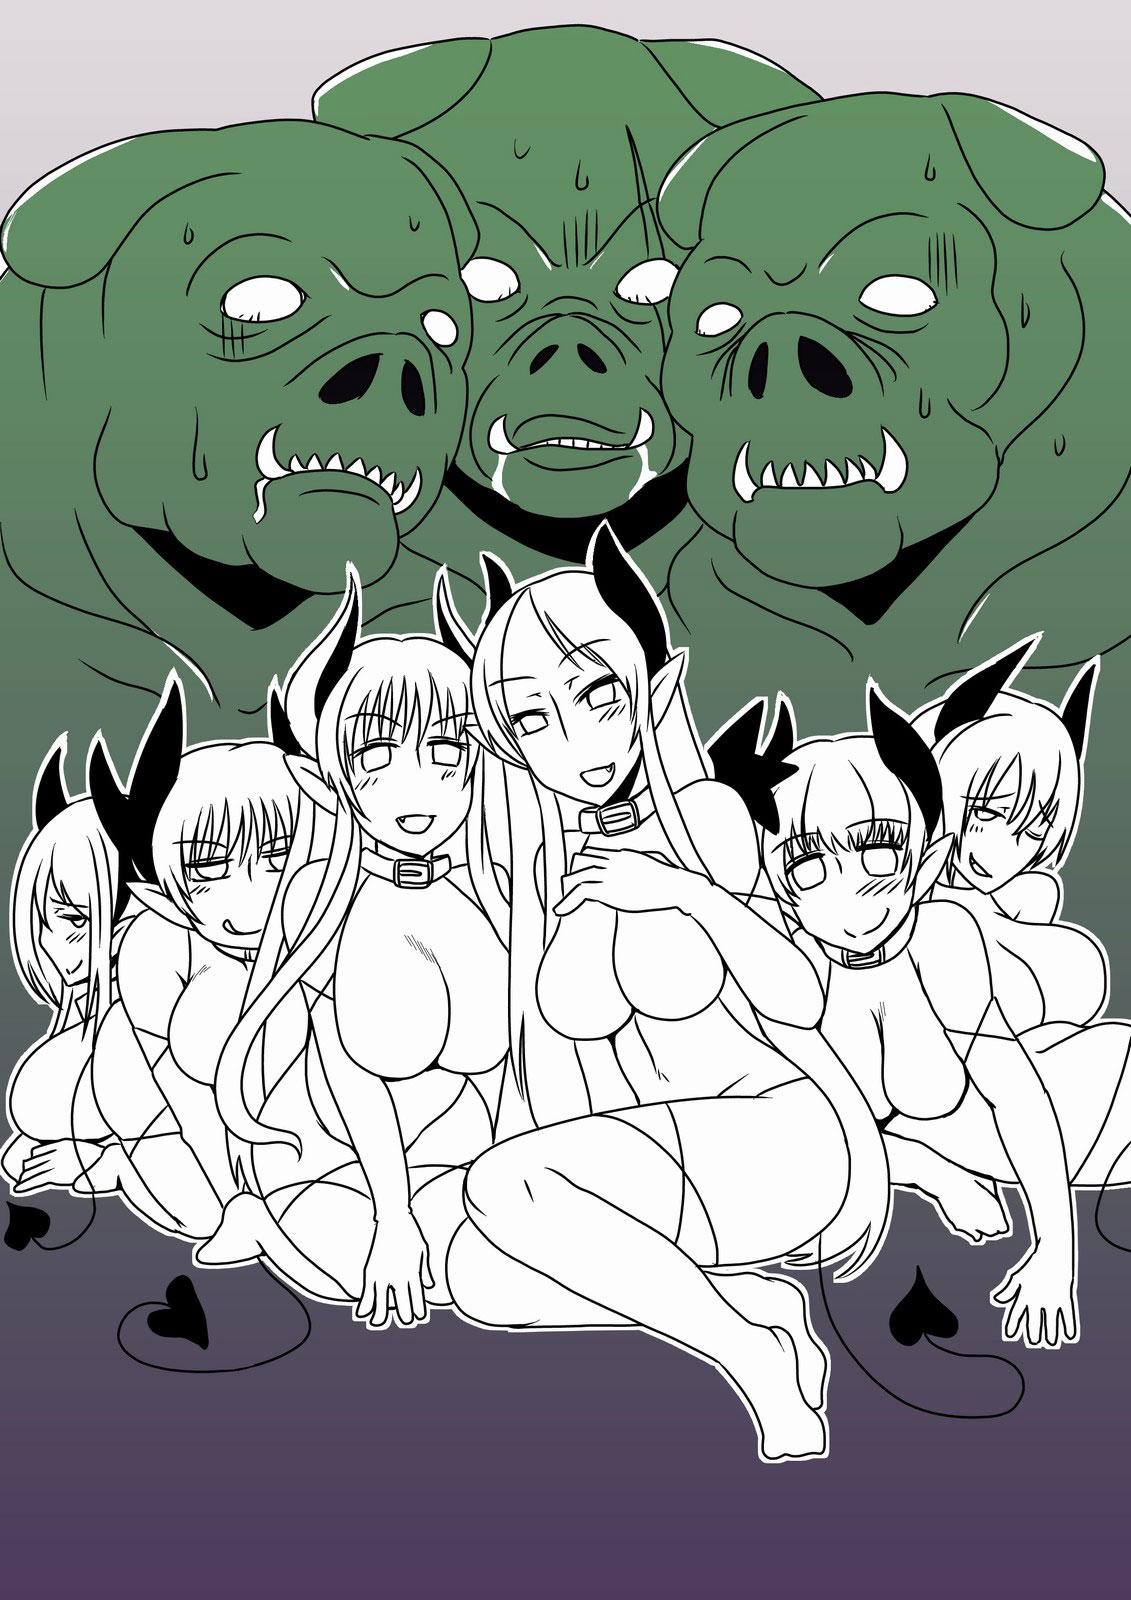 Roludo Orc Dakara Elf Osotta Zenin Succubus Datta wa. | We Assaulted Some Elves Because We're Orcs But It Turns Out They Were All Actually Succubi Pussyfucking - Page 26